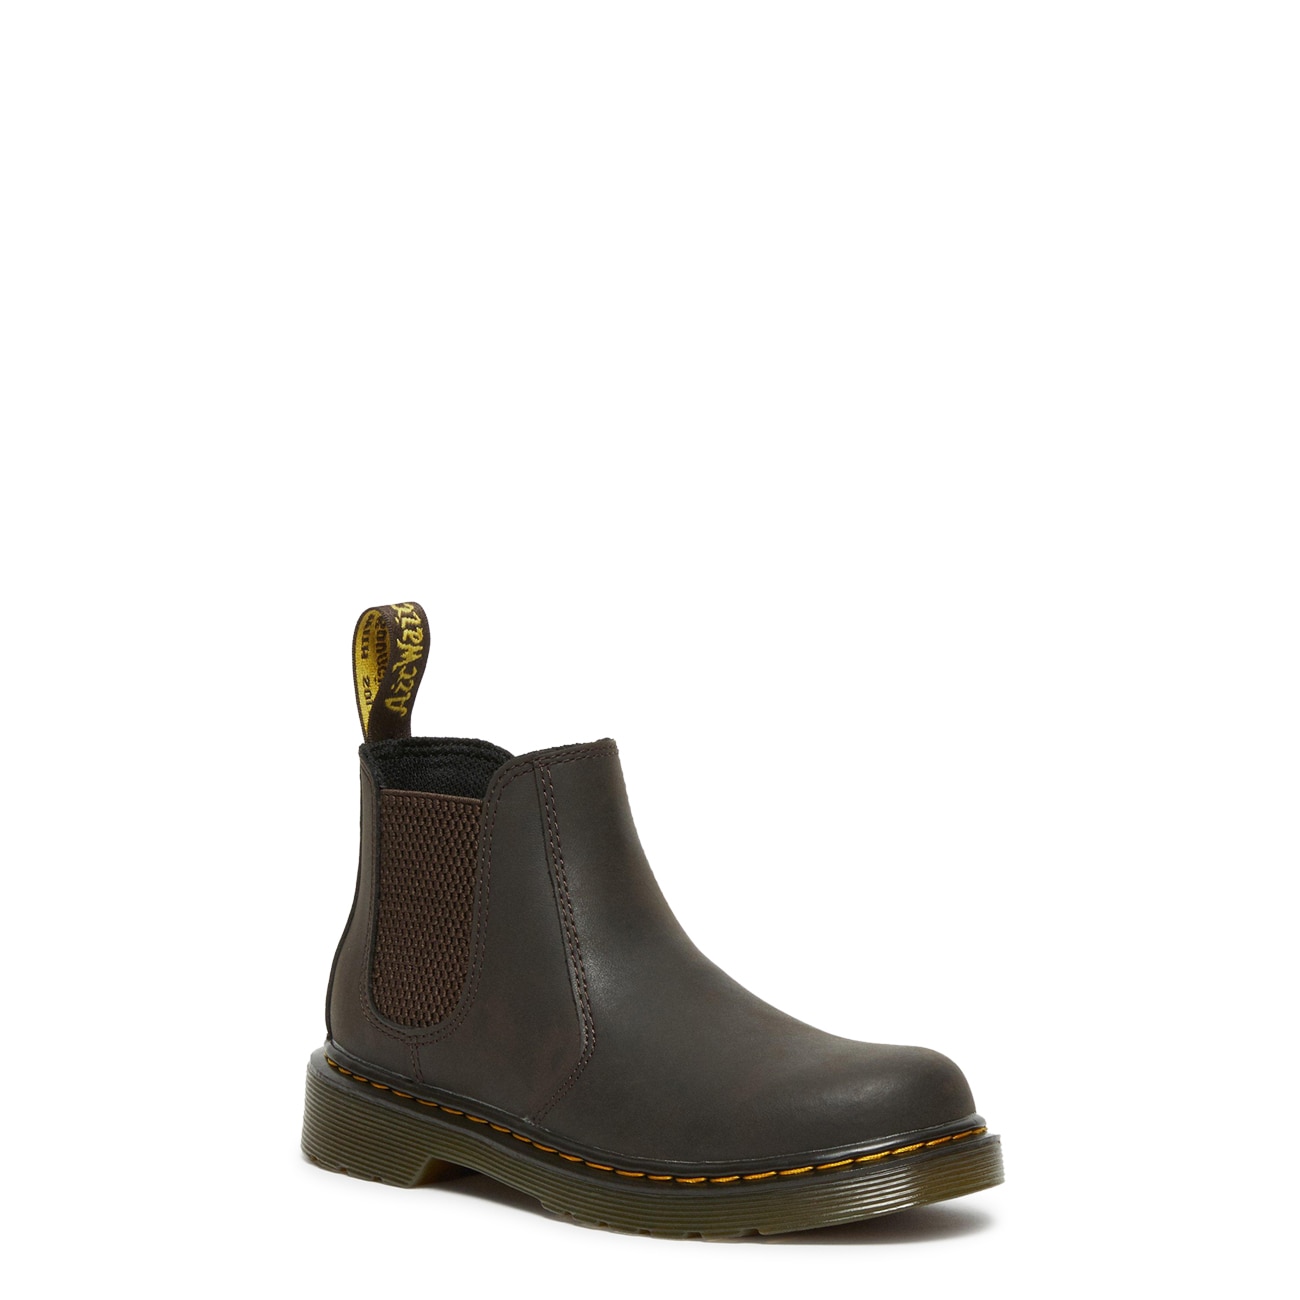 Youth Boys' 2976J Chelsea Boot